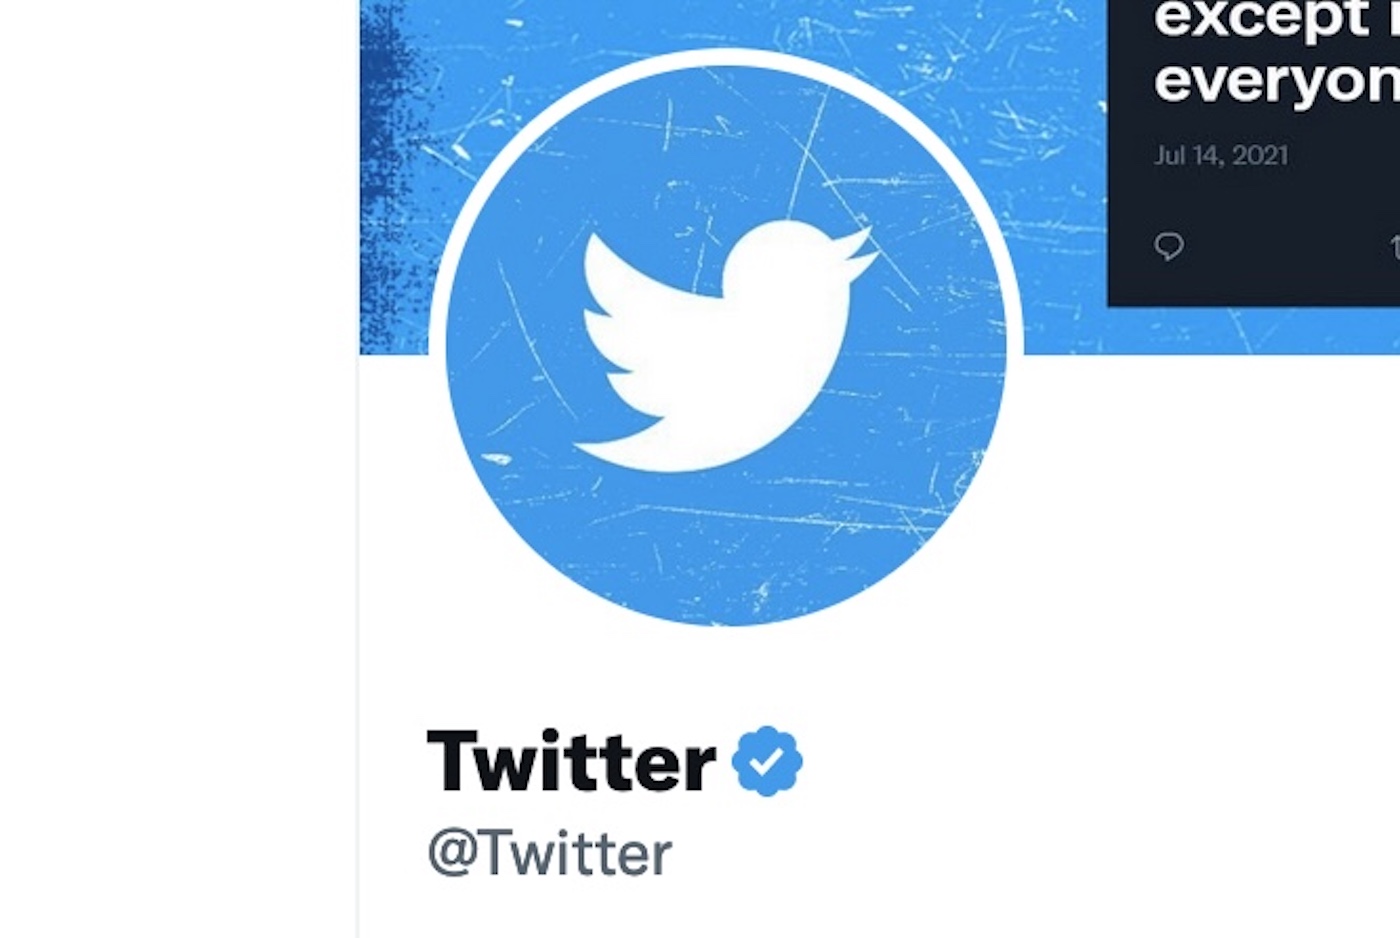 Twitter confirms voluntarily blocking third-party apps like Tweetbot